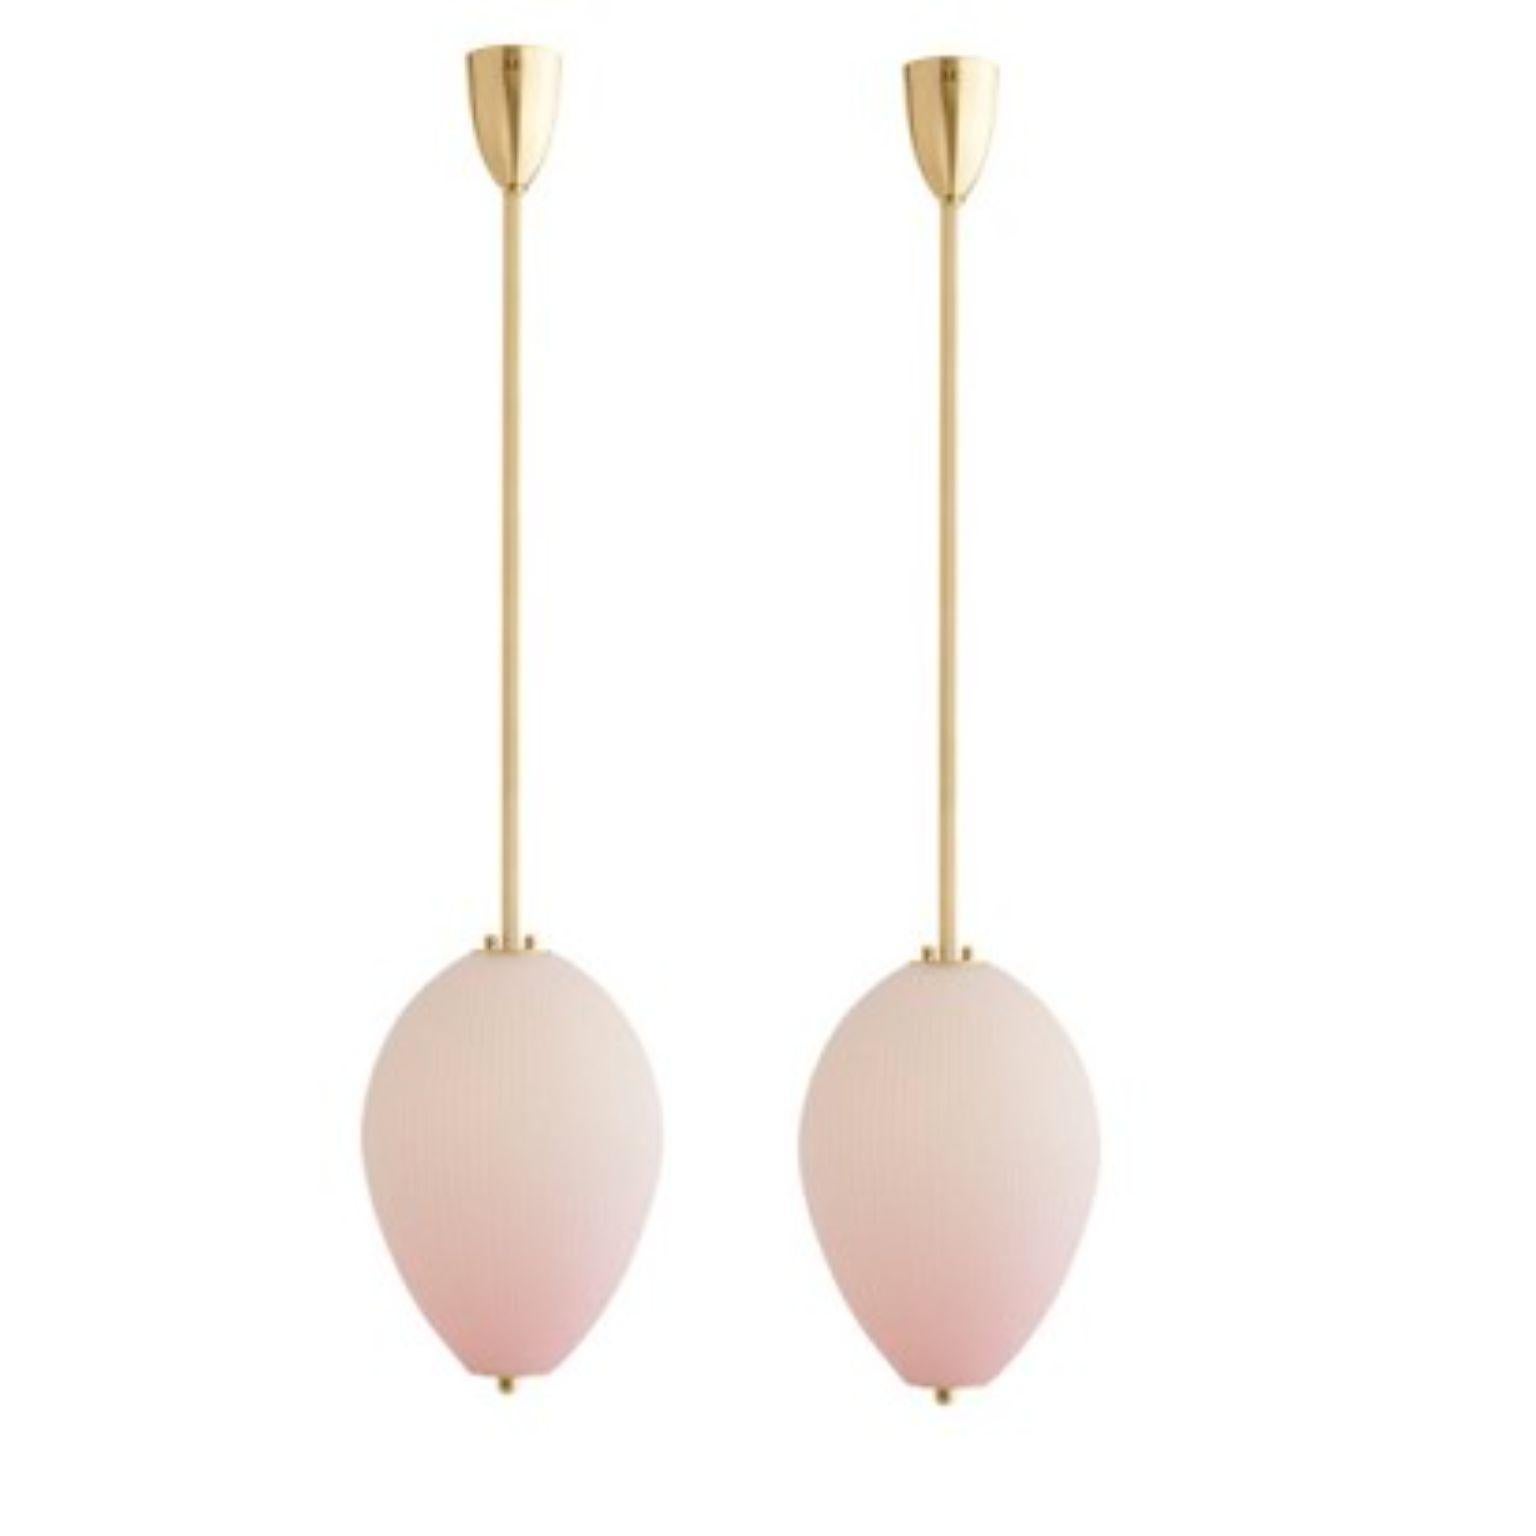 Pendant China 10 by Magic Circus Editions
Dimensions: H 90 x W 32 x D 32 cm, also available in H 110, 130, 150, 175, 190 cm
Materials: Brass, mouth blown glass sculpted with a diamond saw
Colour: Soft rose

Available finishes: Brass,